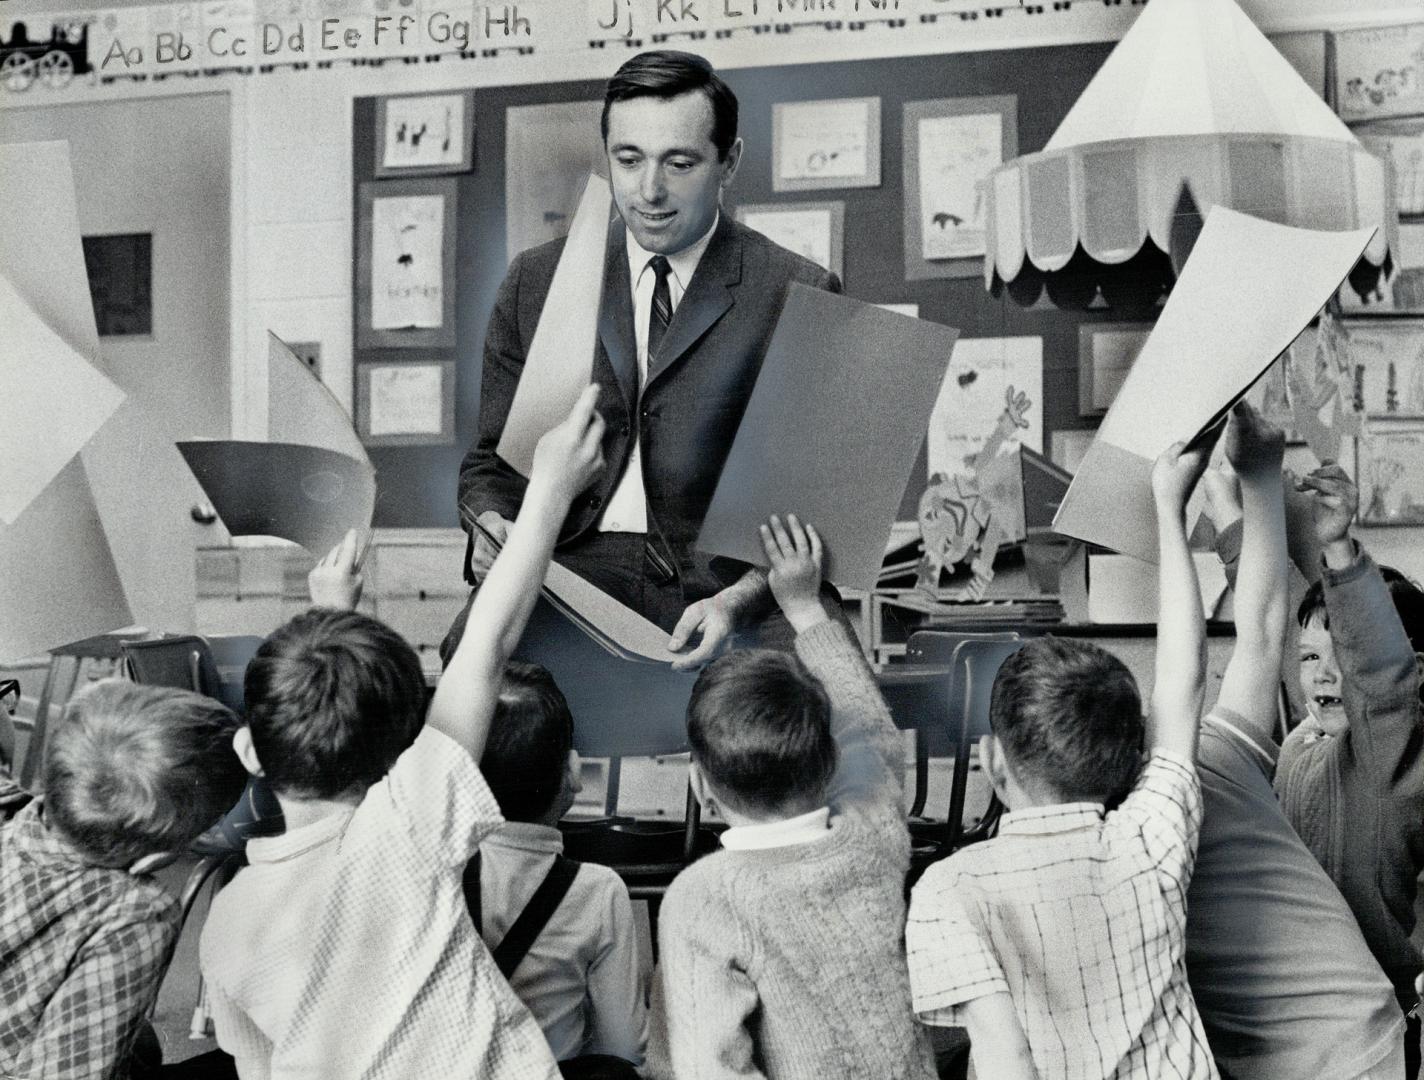 All hands are up as Don Mullin - Ontario's only male kindergarten teacher - conducts a class at Scarborough's St